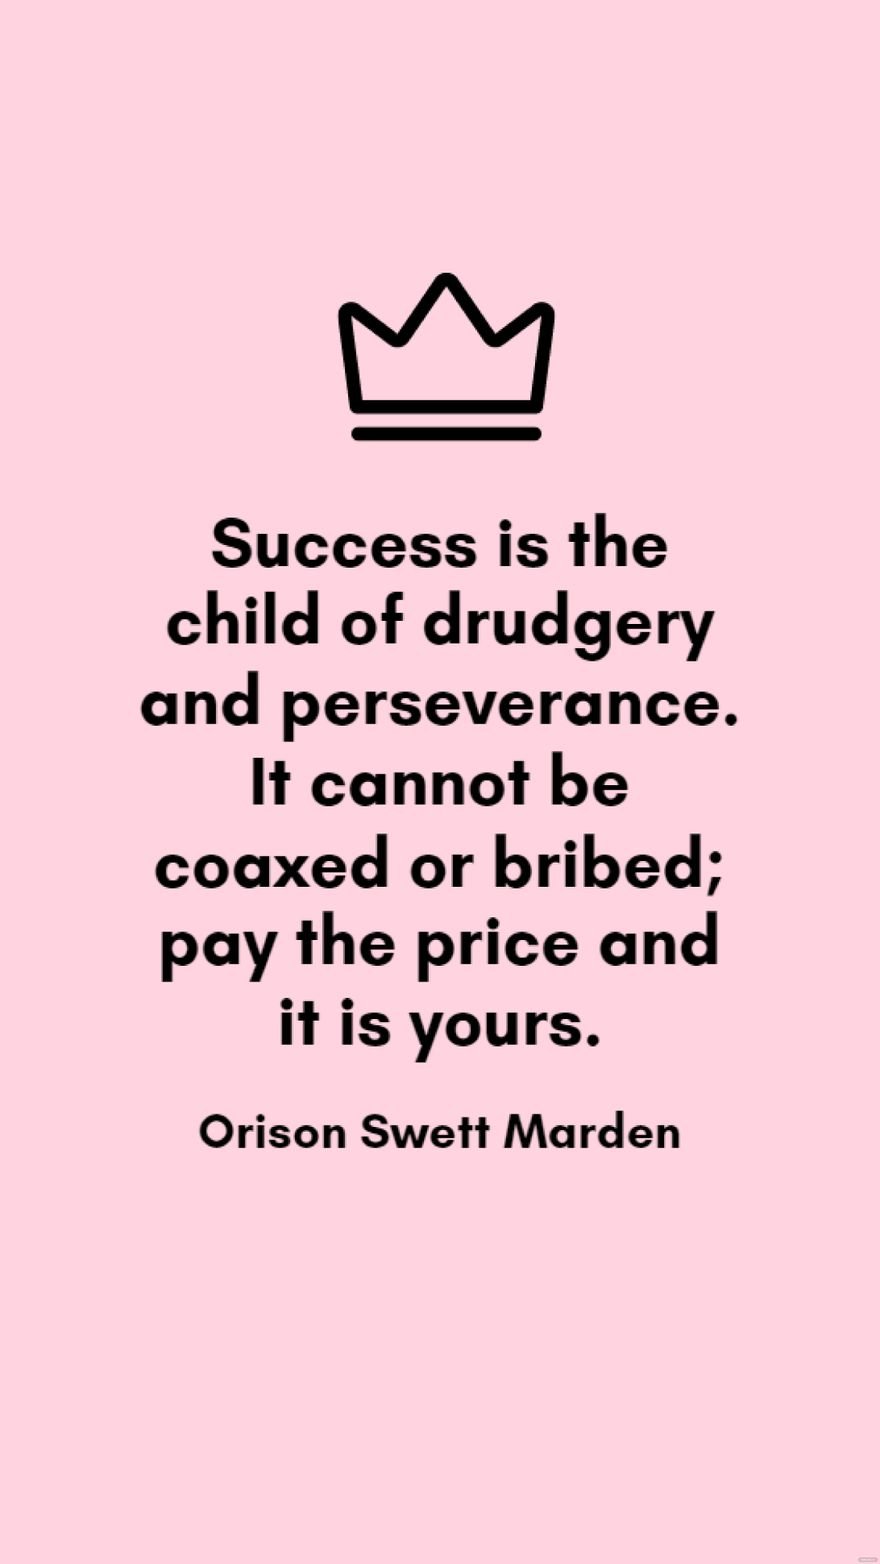 Free Orison Swett Marden - Success is the child of drudgery and perseverance. It cannot be coaxed or bribed; pay the price and it is yours. in JPG